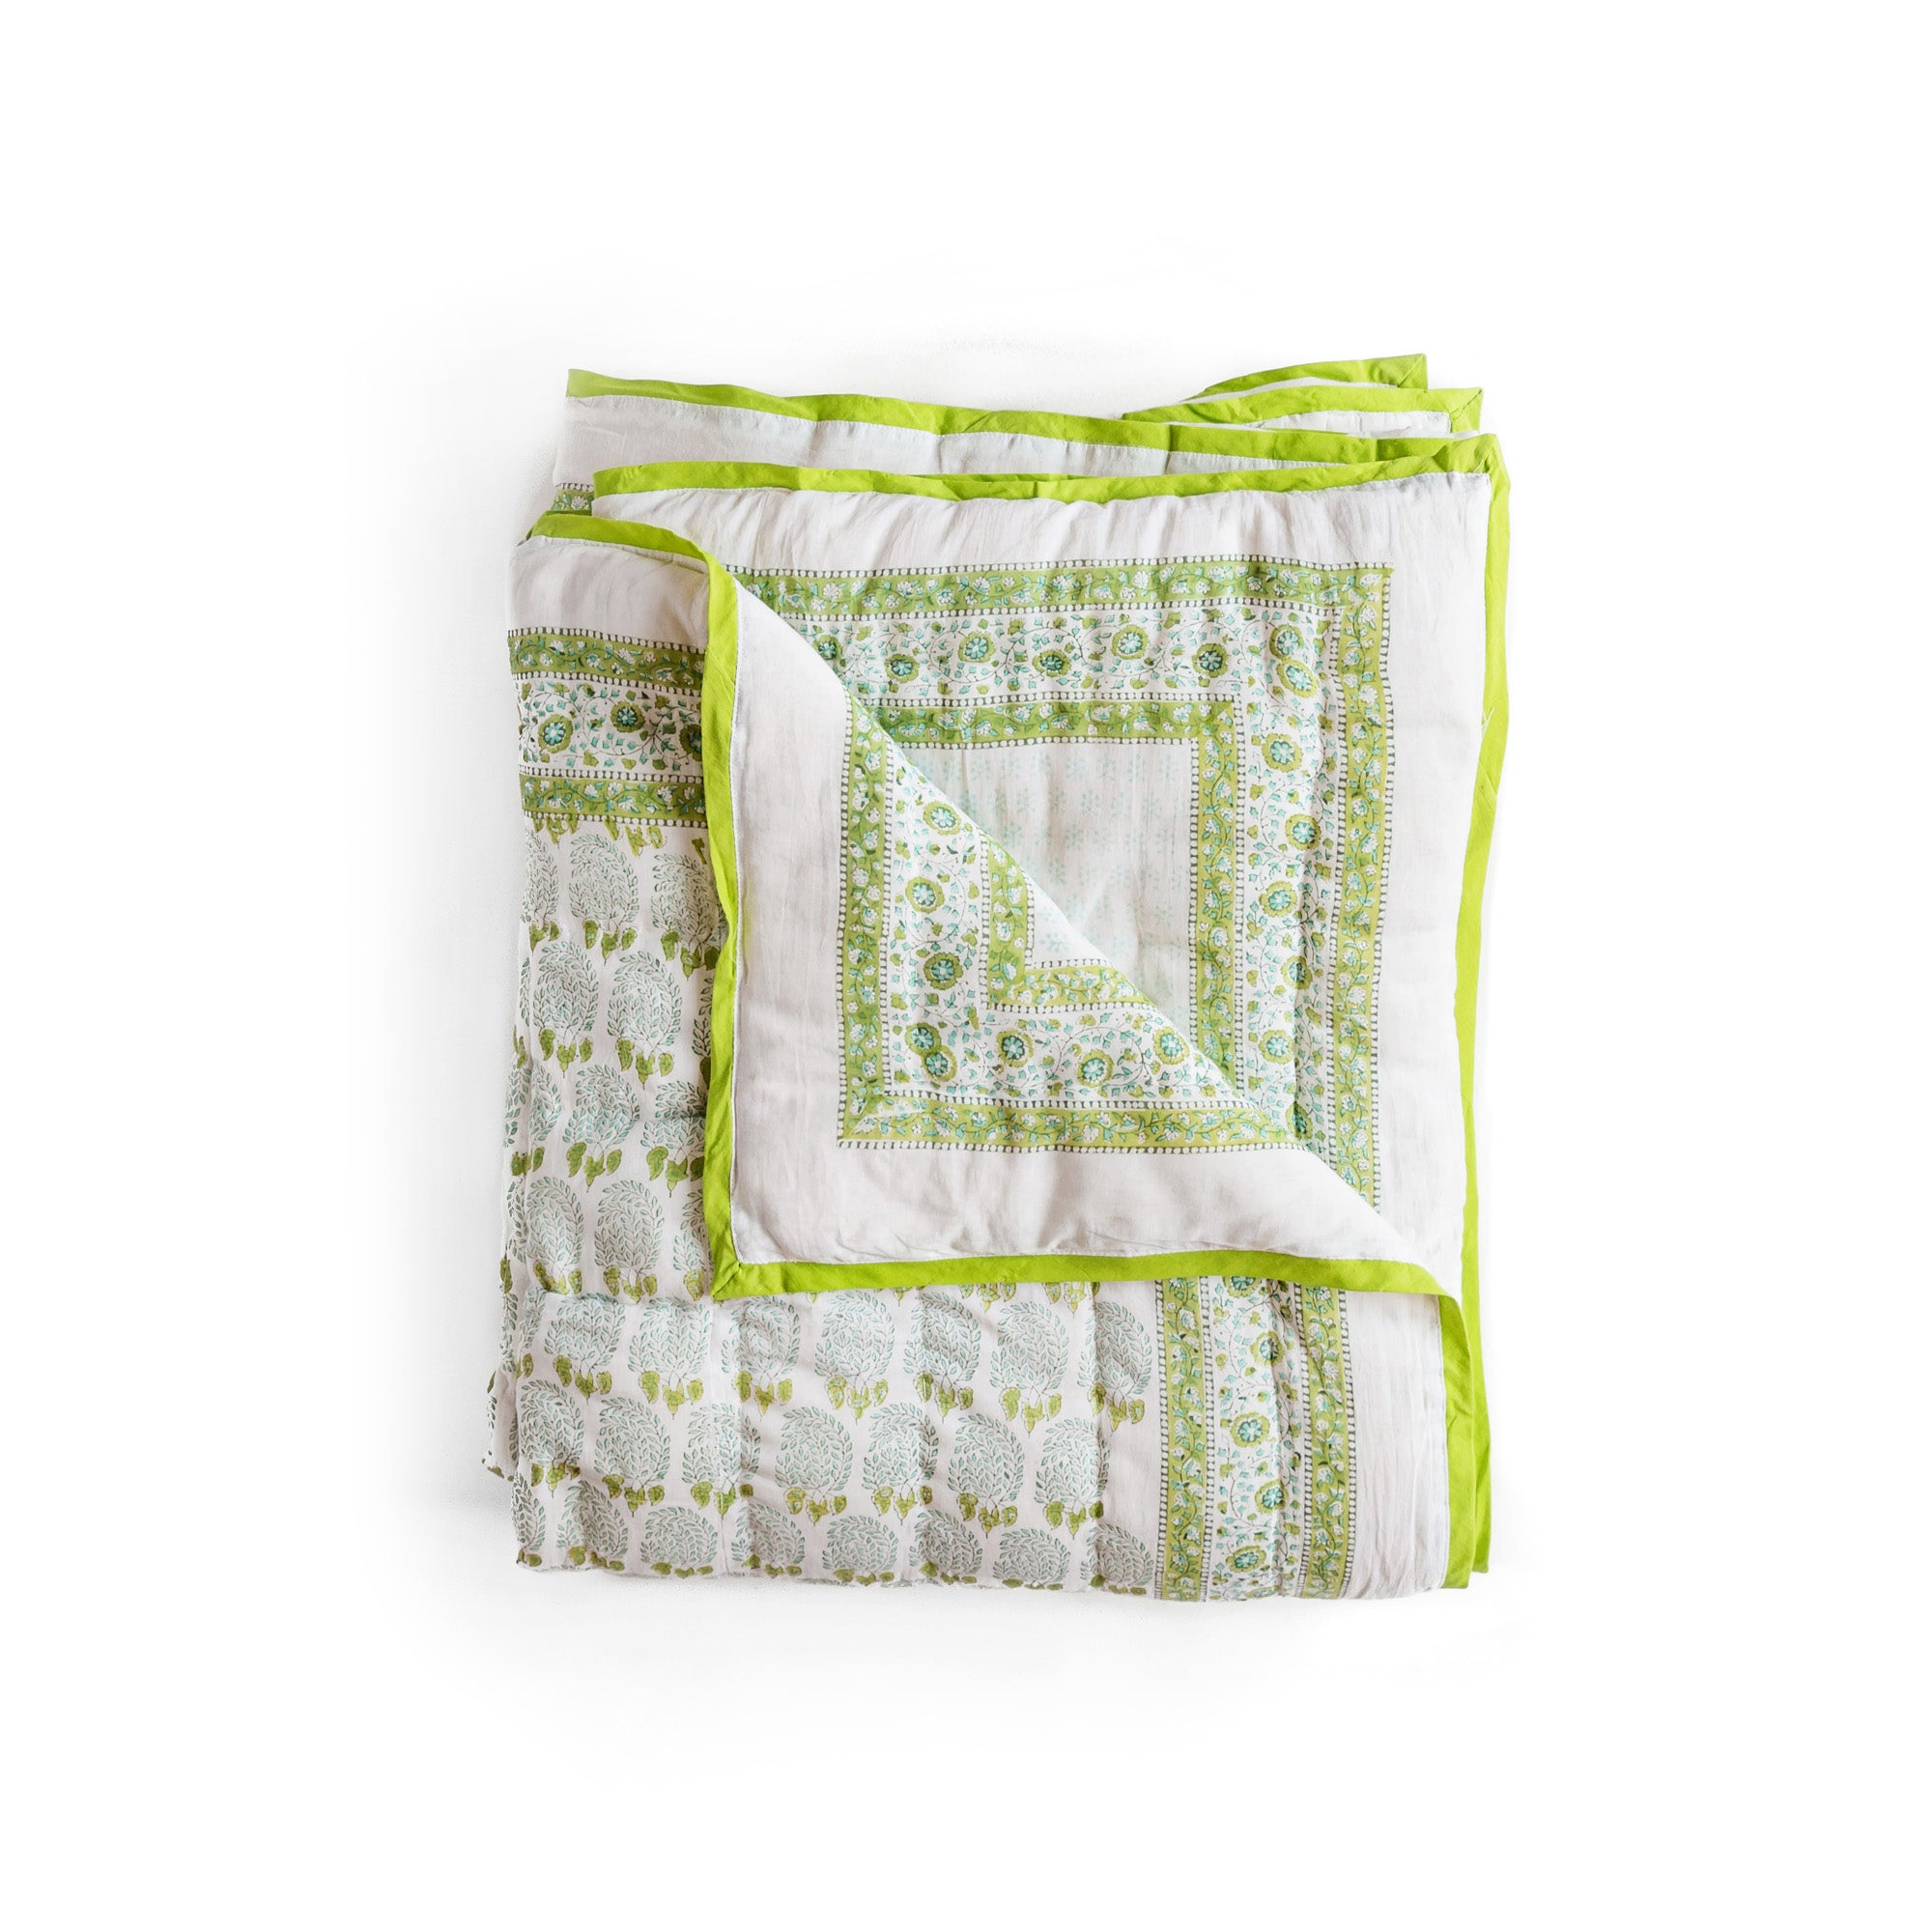 Bumble quilt in green/aque, soft cotton voile with cotton wadding insides.